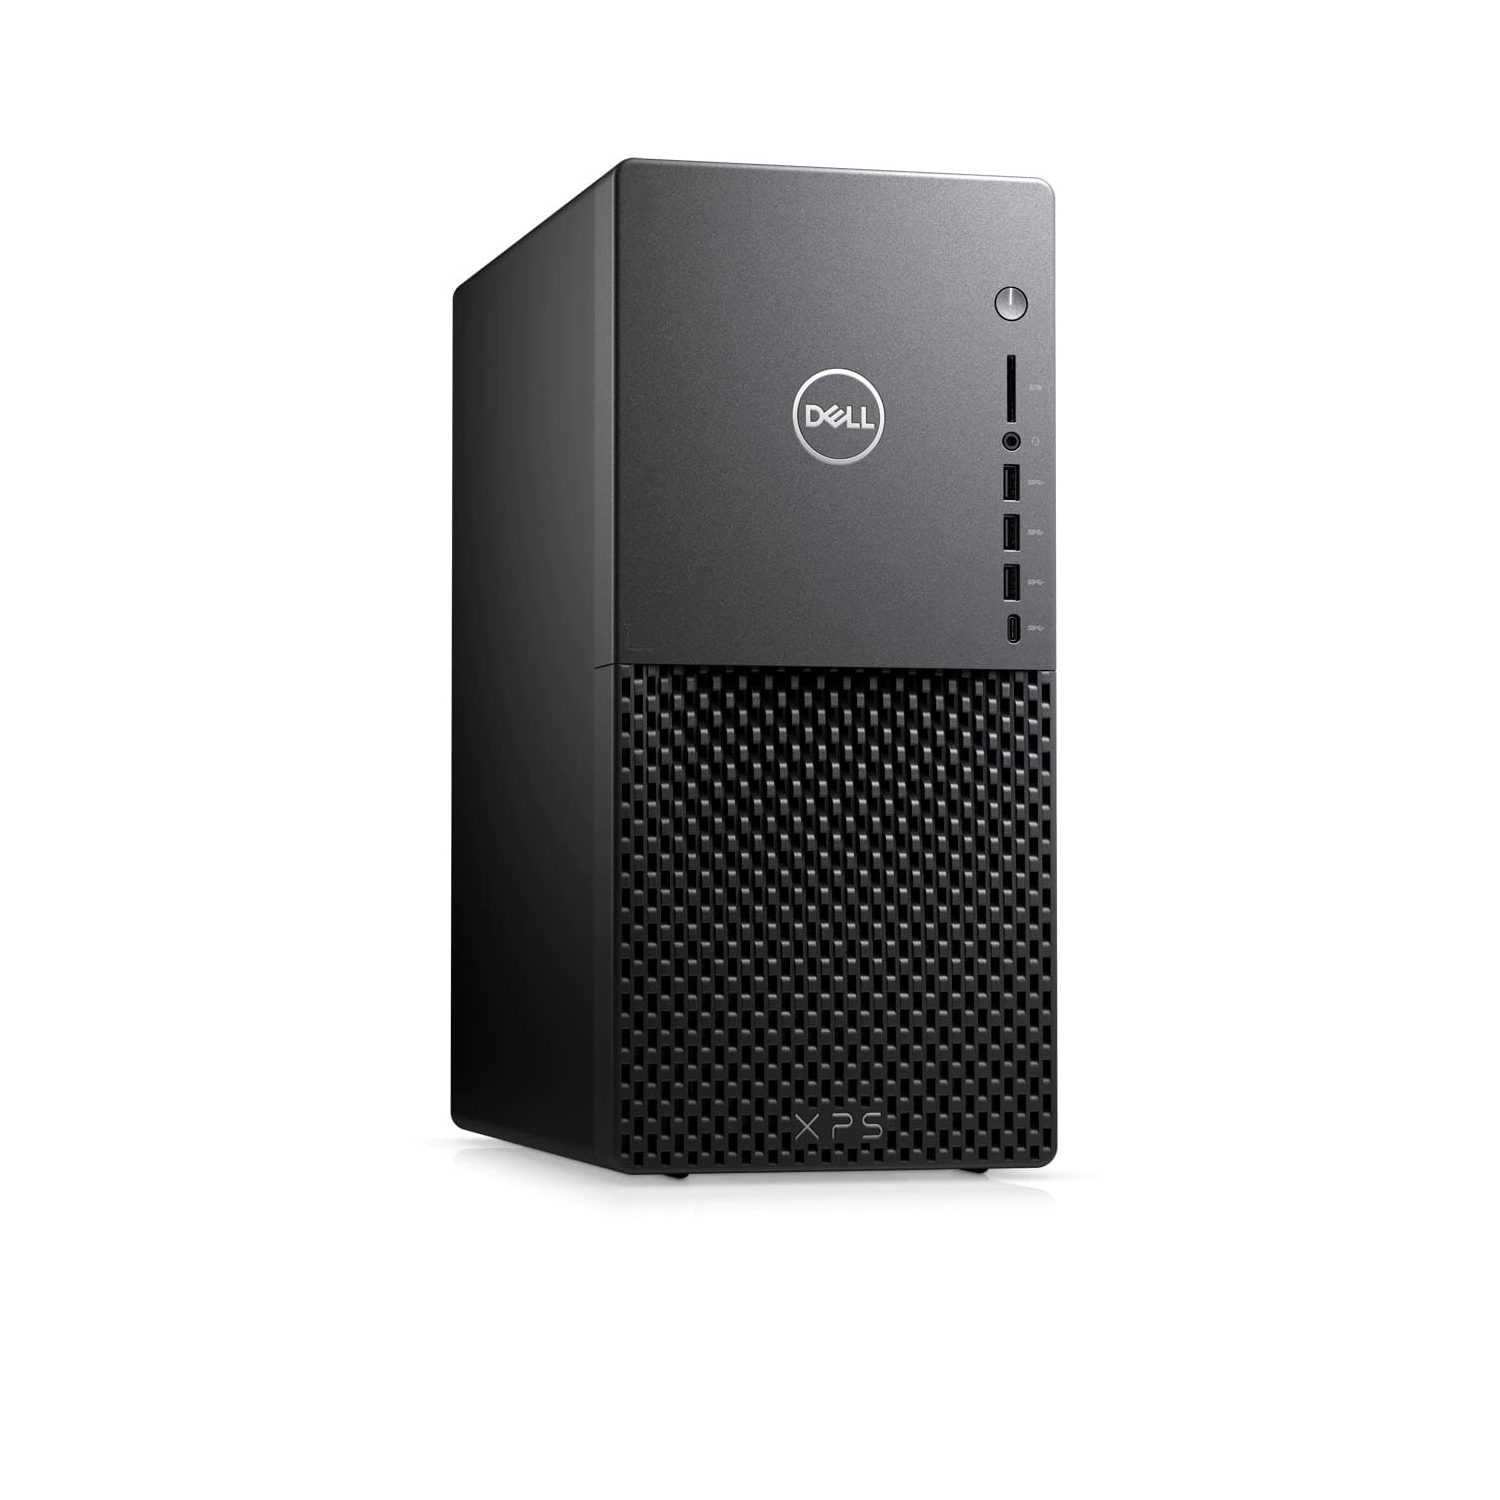 Refurbished (Excellent) - Dell XPS 8940 Desktop (2020) | Core i7 - 1TB SSD + 1TB HDD - 32GB RAM - 1660 Ti | 8 Cores @ 4.8 GHz - 10th Gen CPU Certified Refurbished